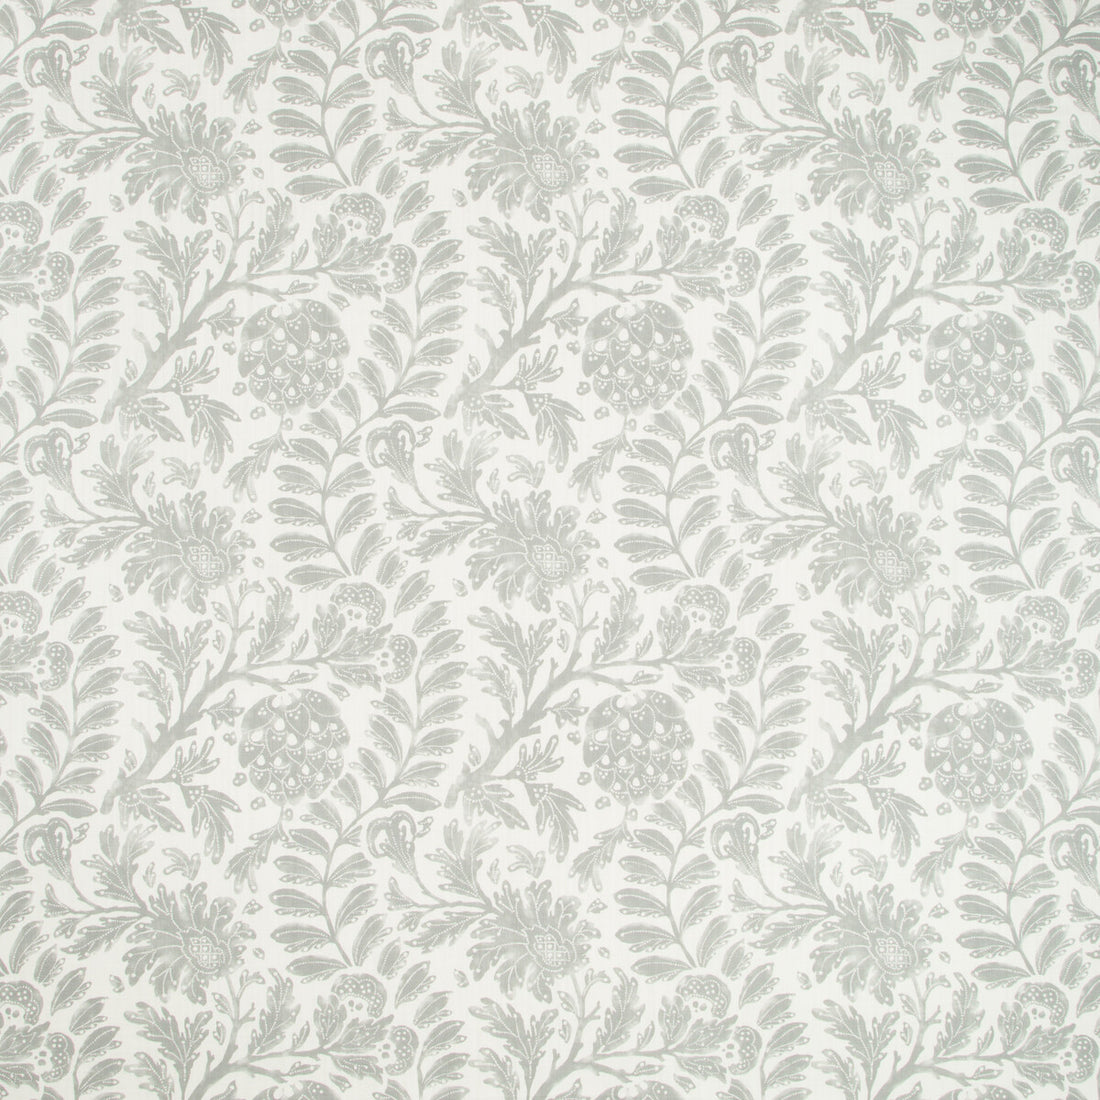 Wollerton fabric in pewter color - pattern WOLLERTON.11.0 - by Kravet Basics in the Greenwich collection